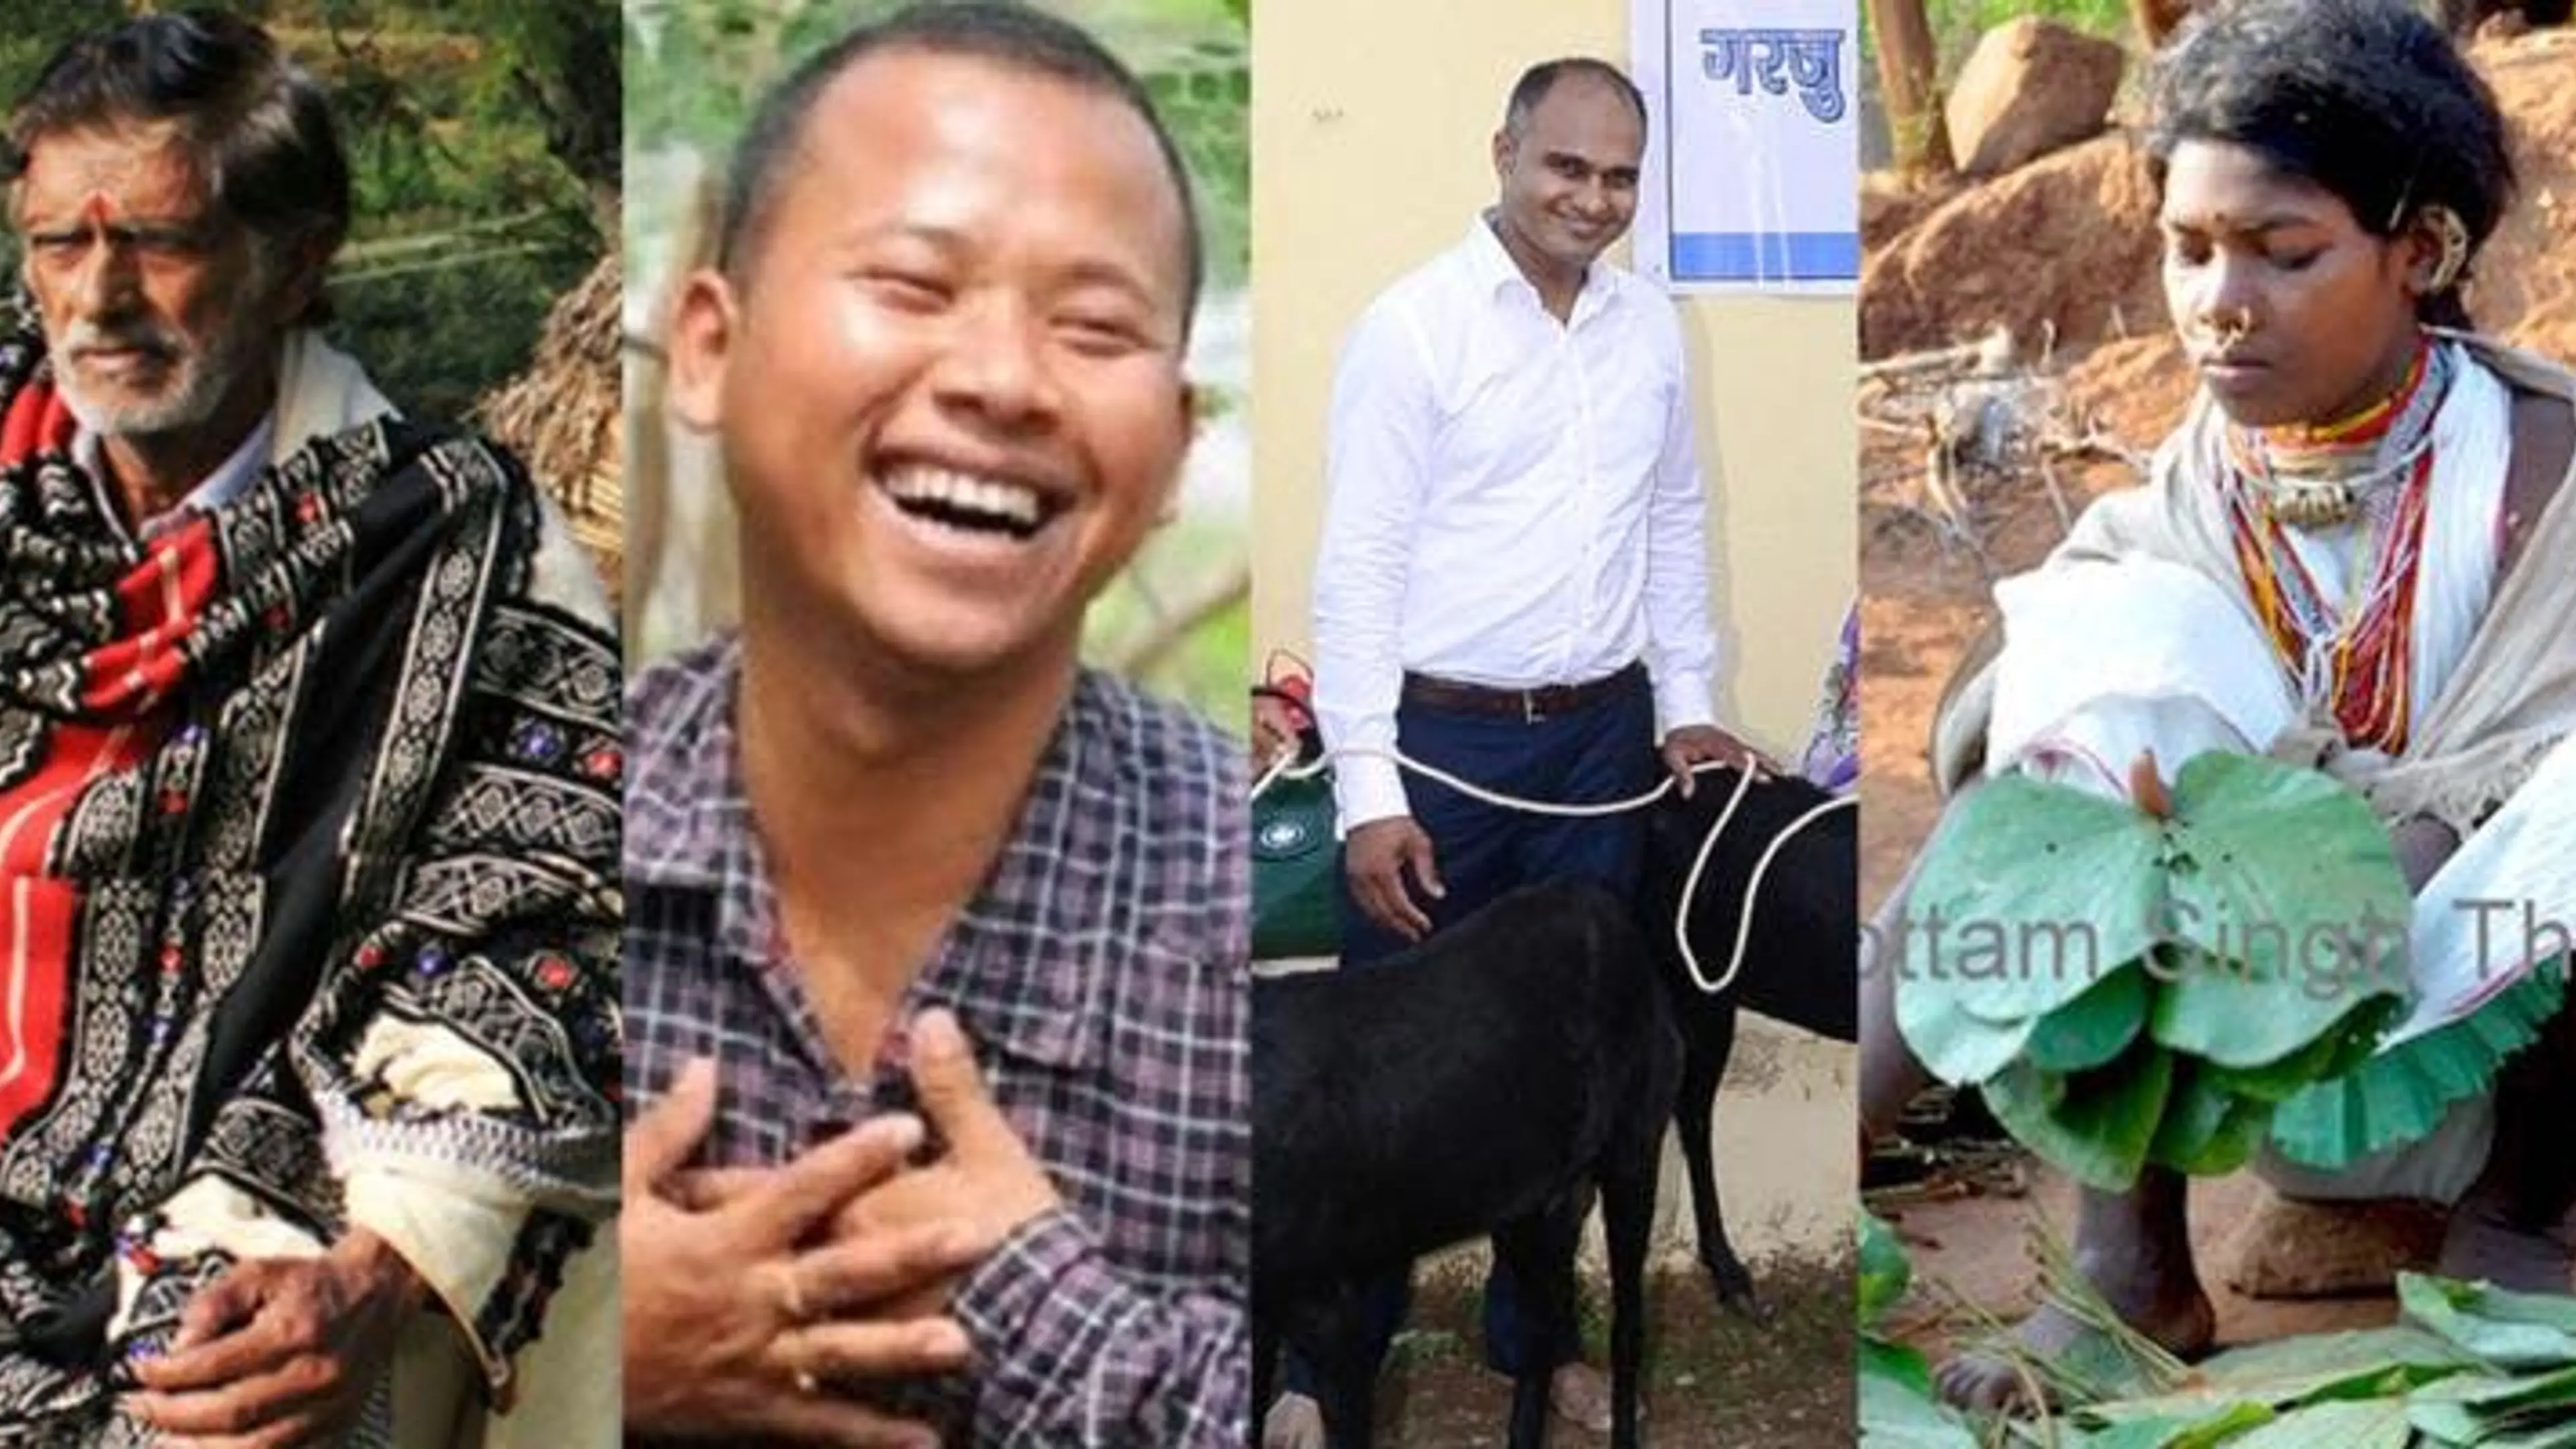 These 8 entrepreneurs show how tribal entrepreneurship is booming in India